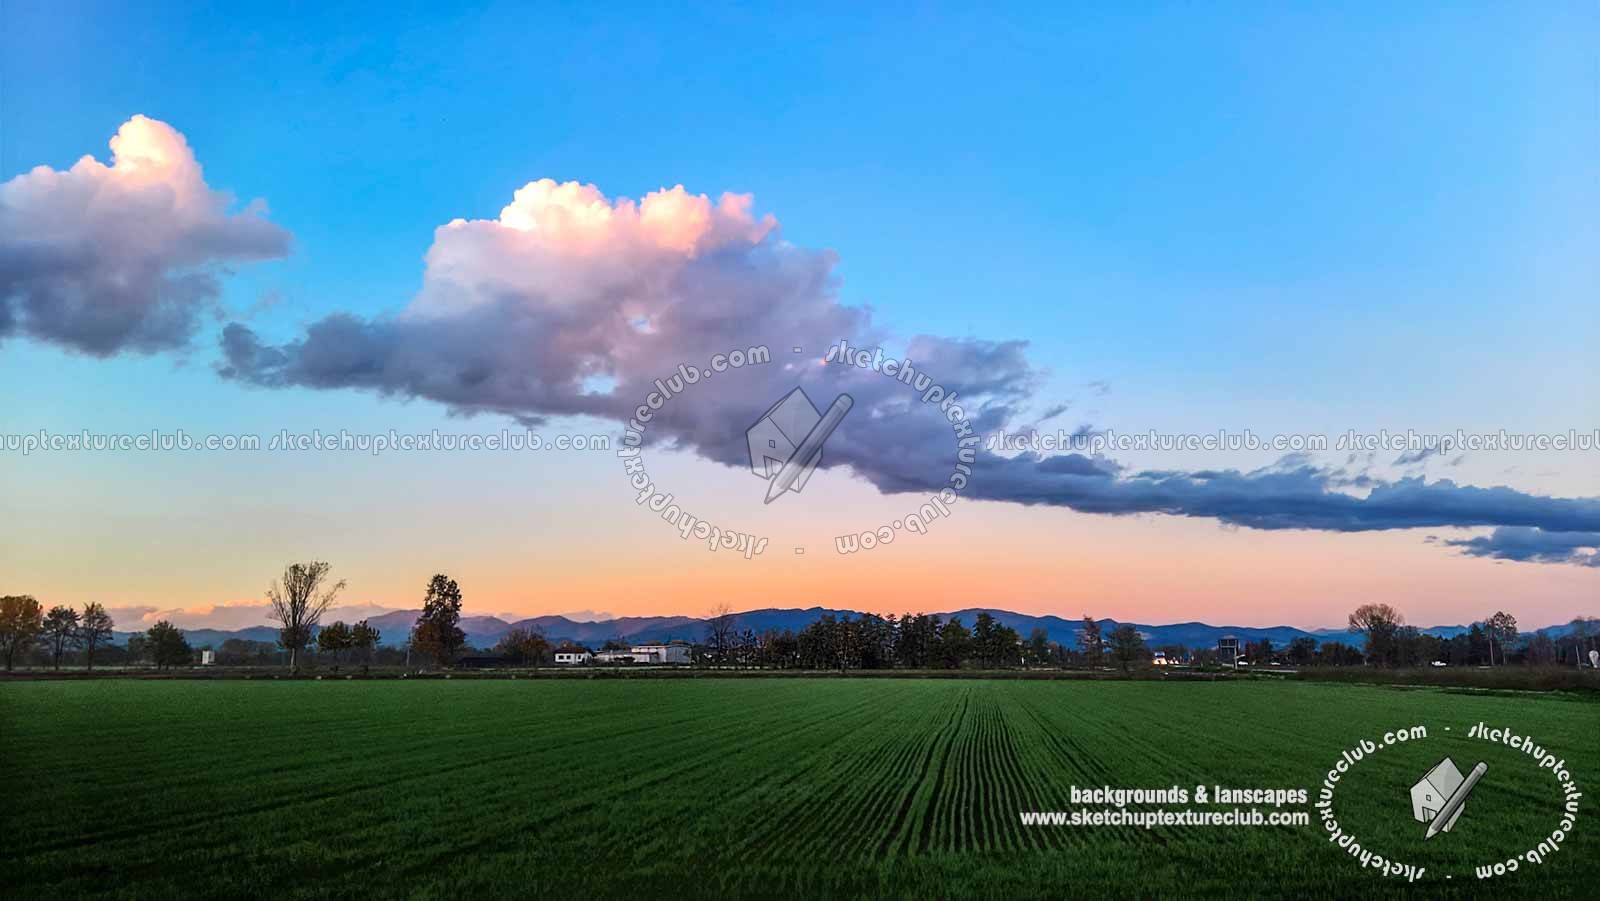 Autumn sunset with countryside background 21016